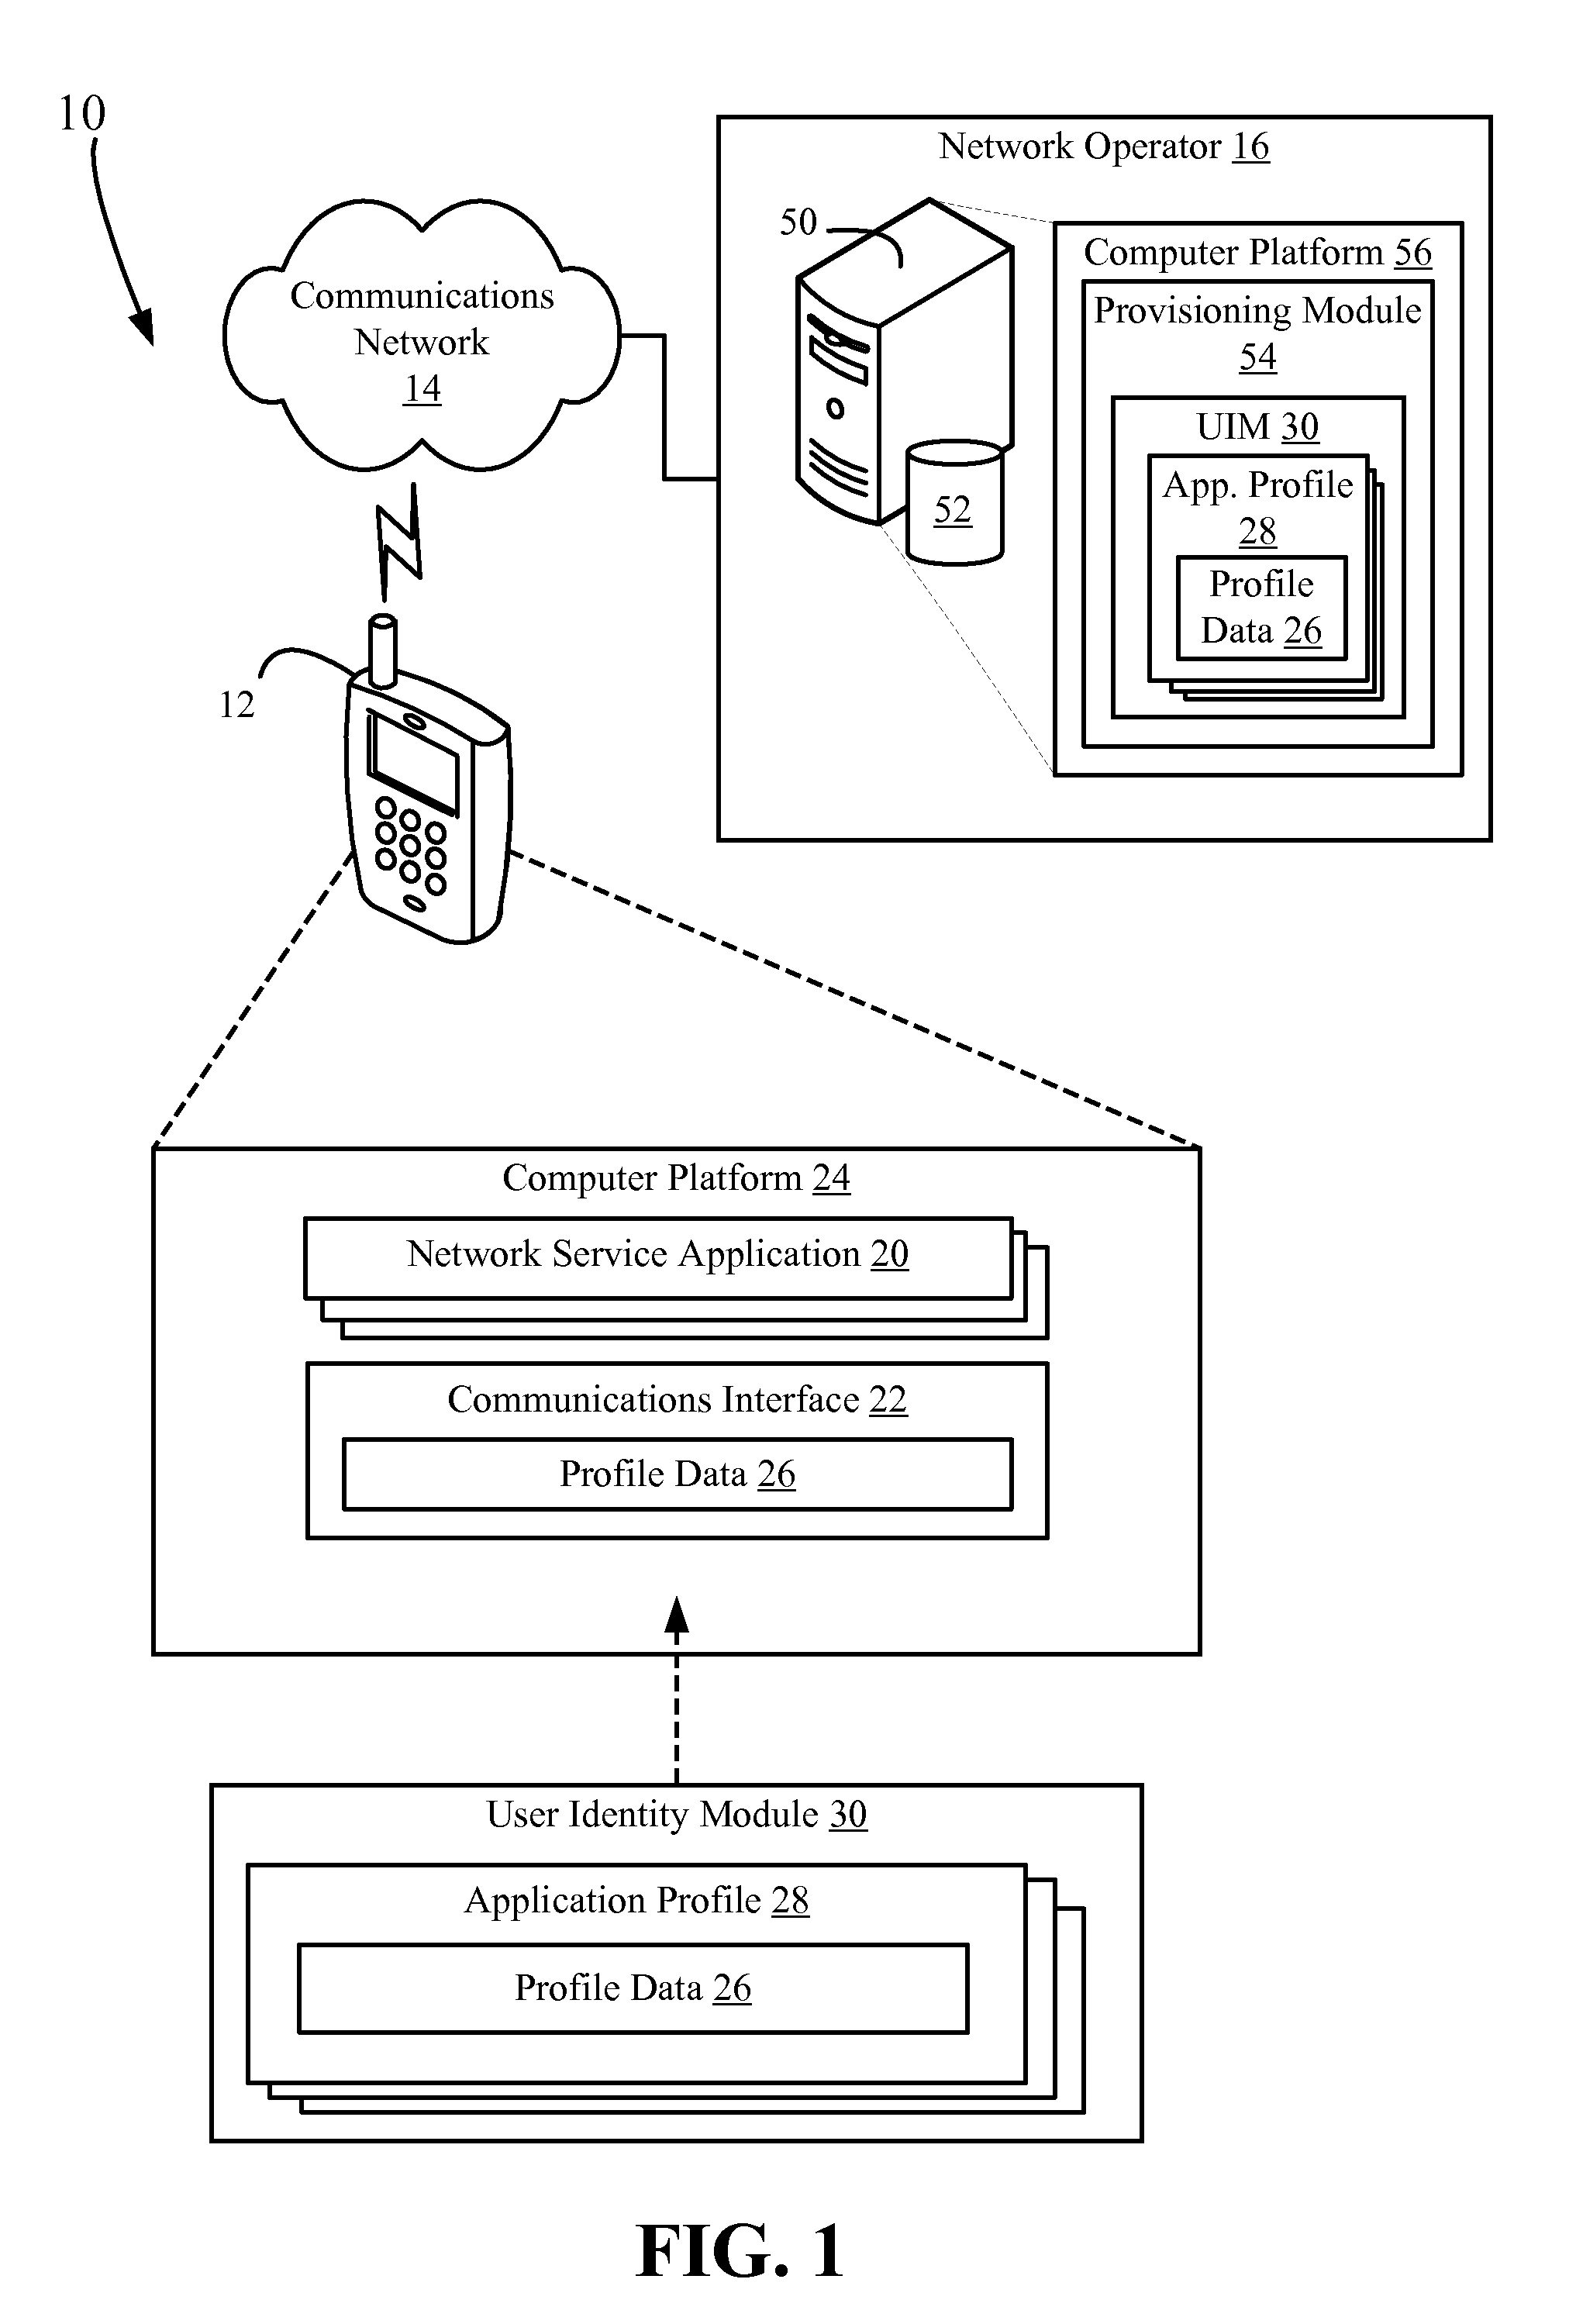 Apparatus and methods associated with open market handsets